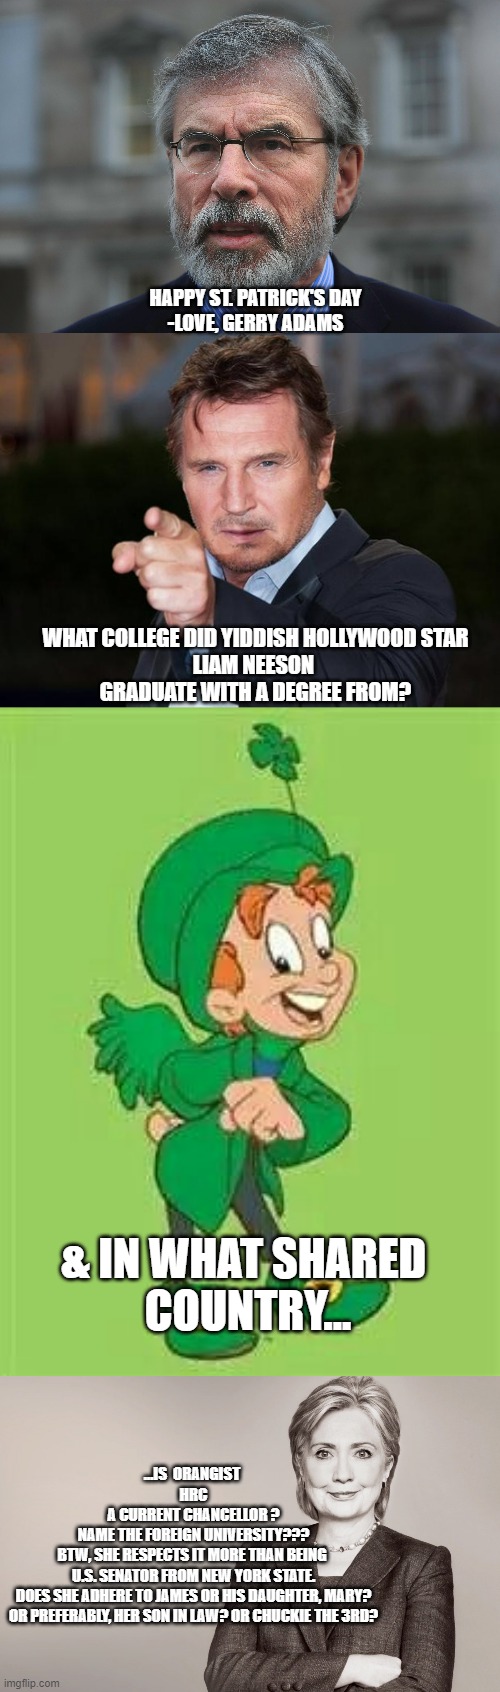 Chancellor of Foreign University, better than brief 1 term, U.S. Senator job | HAPPY ST. PATRICK'S DAY
-LOVE, GERRY ADAMS; WHAT COLLEGE DID YIDDISH HOLLYWOOD STAR
LIAM NEESON 
GRADUATE WITH A DEGREE FROM? & IN WHAT SHARED 
COUNTRY... ...IS  ORANGIST 
HRC
A CURRENT CHANCELLOR ?
NAME THE FOREIGN UNIVERSITY???

BTW, SHE RESPECTS IT MORE THAN BEING 
U.S. SENATOR FROM NEW YORK STATE.
DOES SHE ADHERE TO JAMES OR HIS DAUGHTER, MARY?
OR PREFERABLY, HER SON IN LAW? OR CHUCKIE THE 3RD? | image tagged in gerry adams,liam neeson point,lucky charms leprechaun,hillary clinton,tony blair,prince charles | made w/ Imgflip meme maker